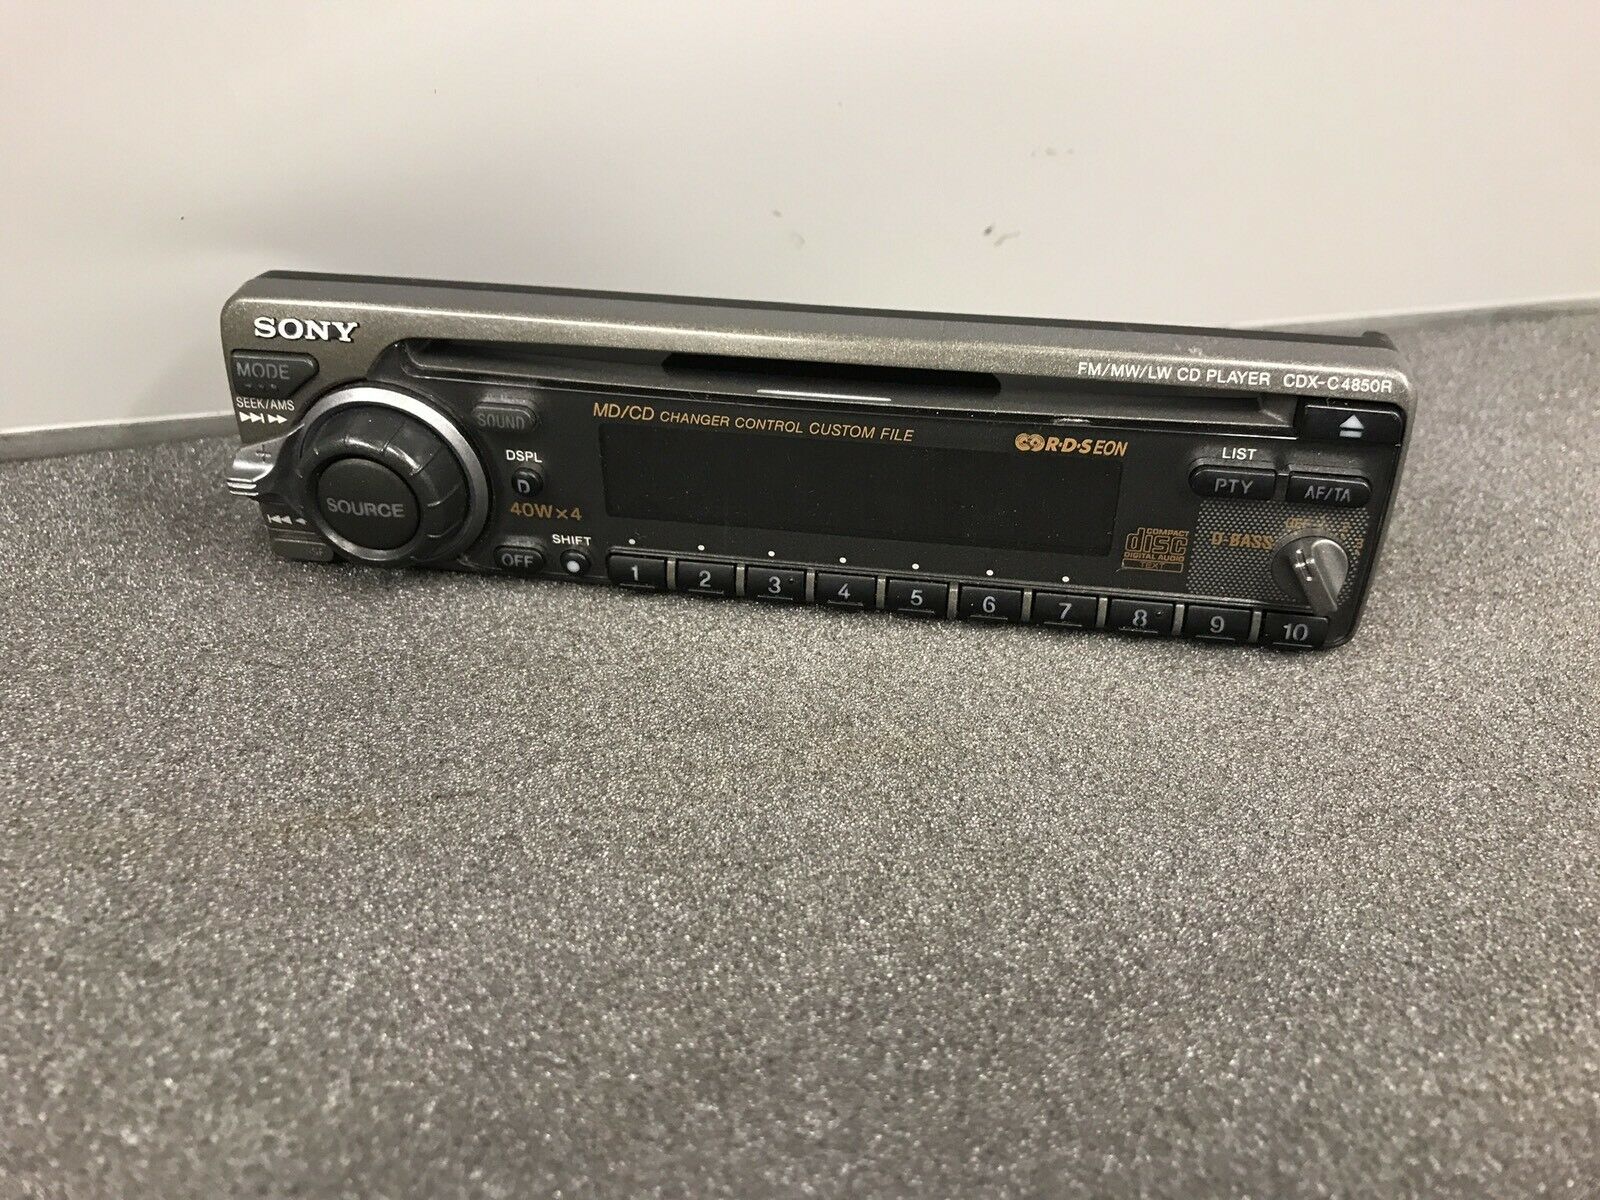 Sony Cdx-C4850r Car Radio Stereo Face Front Panel complete Cdxc4850r